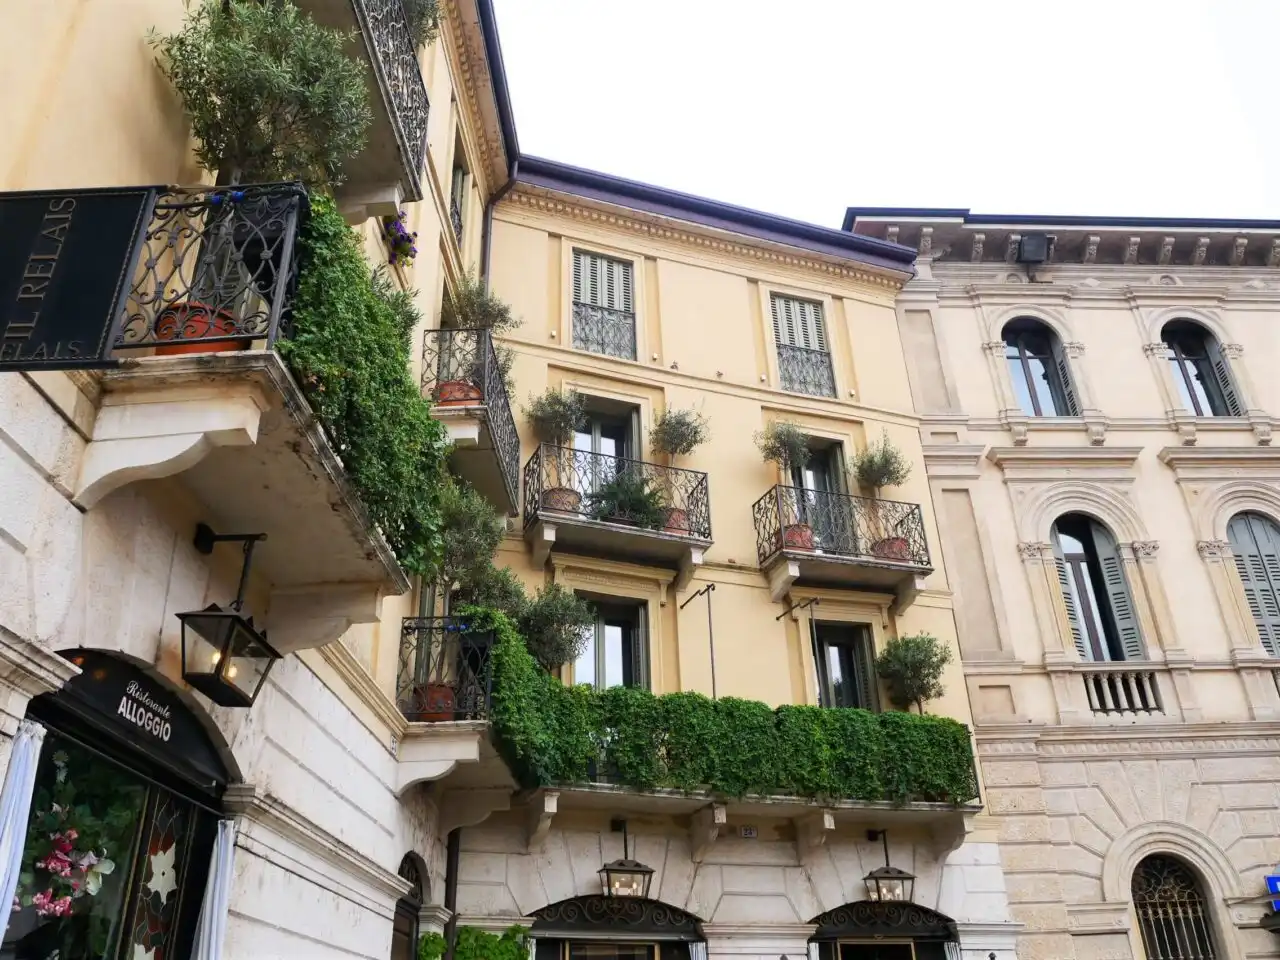 Facades and balconies with plants on them in Verona